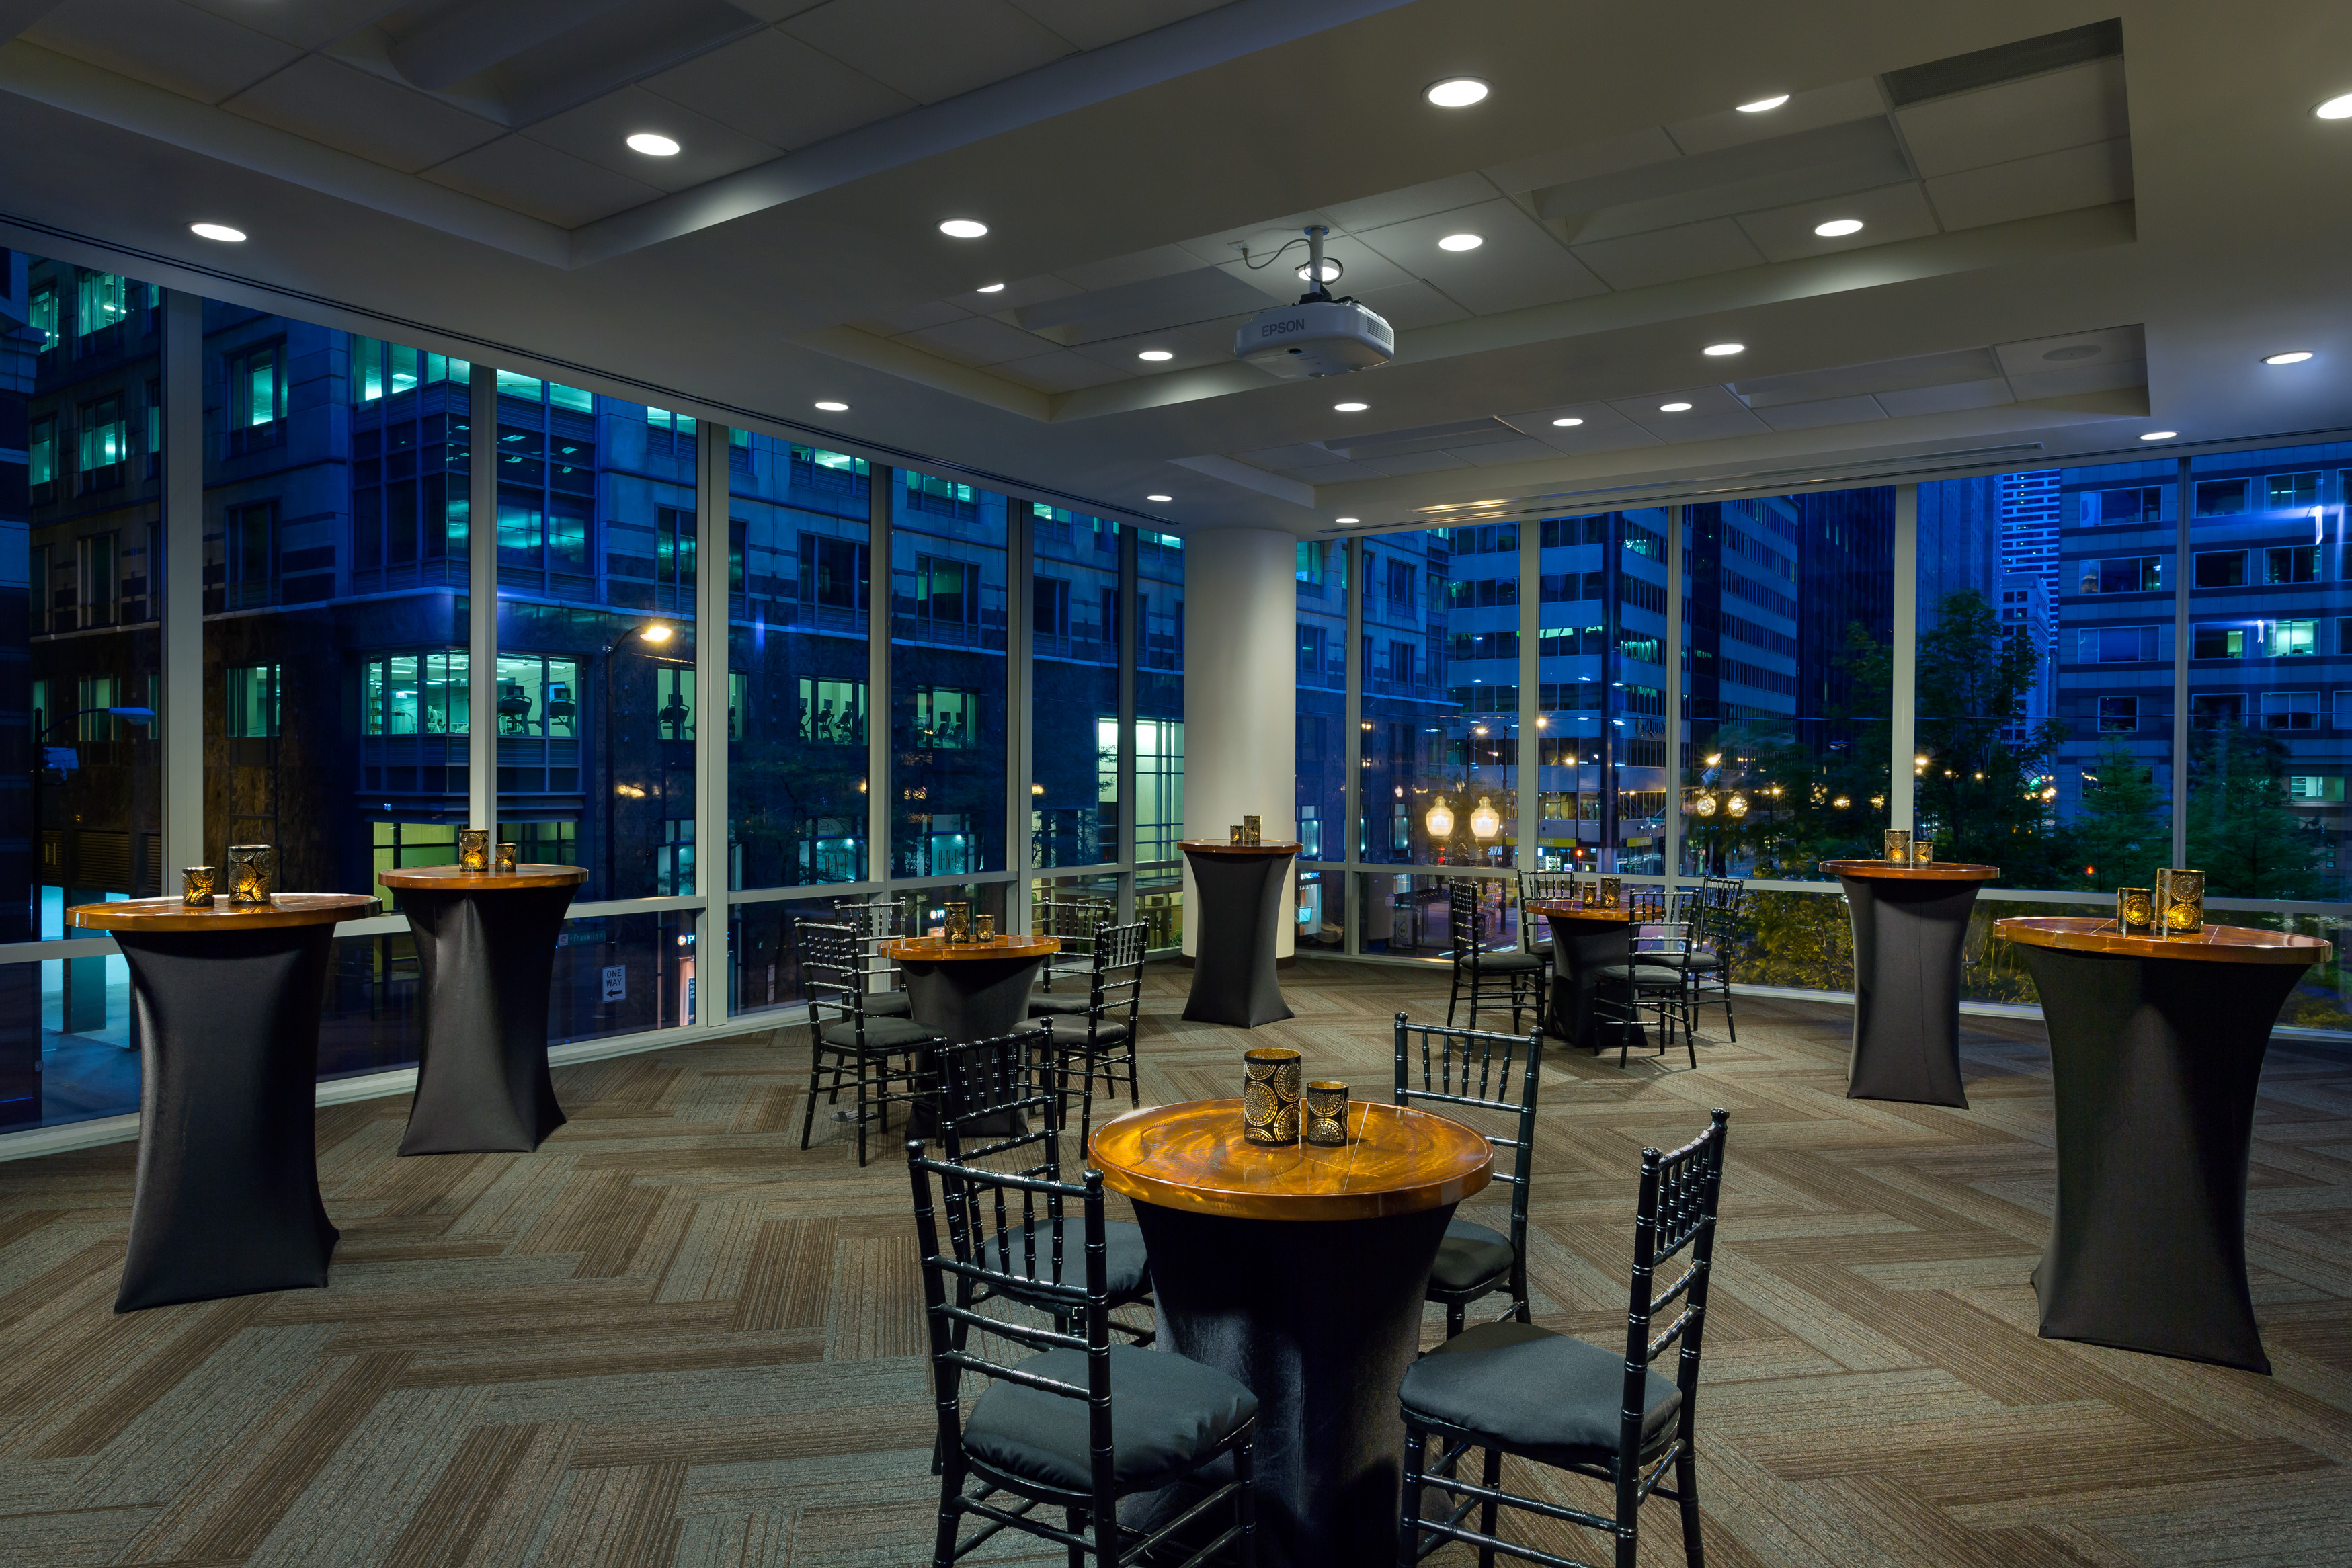 Host your next meeting or event within our 2,300 square feet of flexible, high-tech event space with floor to ceiling windows.